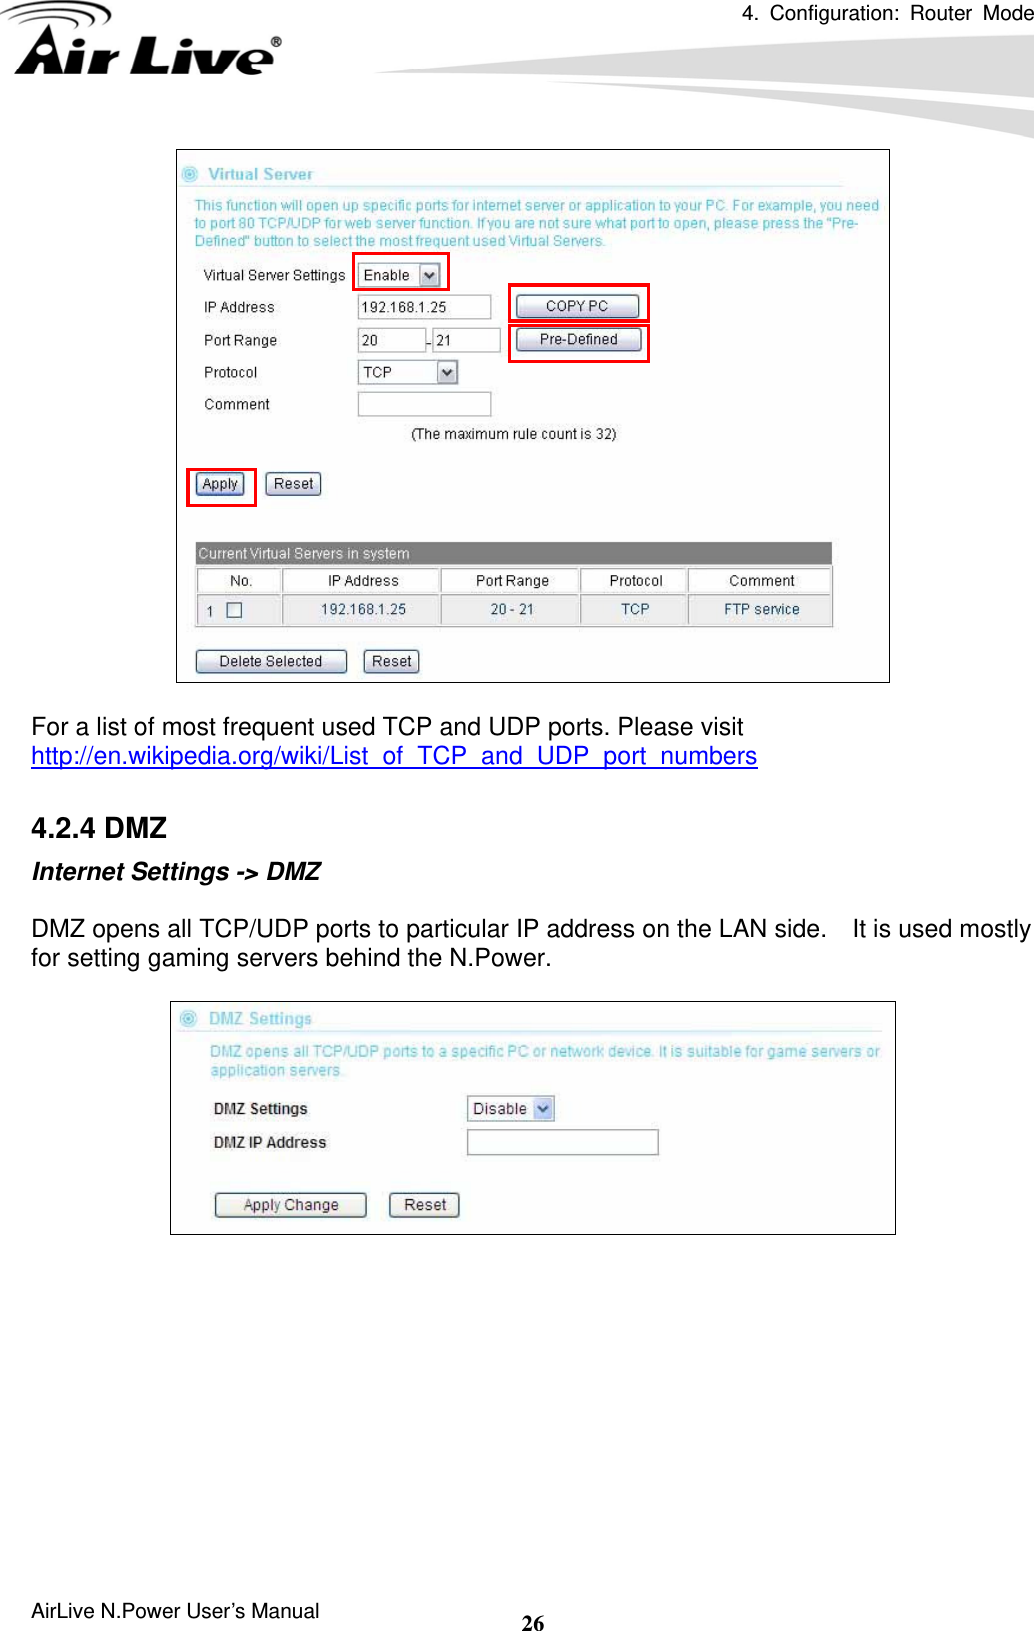 4. Configuration: Router Mode  AirLive N.Power User’s Manual  26  For a list of most frequent used TCP and UDP ports. Please visit http://en.wikipedia.org/wiki/List_of_TCP_and_UDP_port_numbers  4.2.4 DMZ Internet Settings -&gt; DMZ  DMZ opens all TCP/UDP ports to particular IP address on the LAN side.    It is used mostly for setting gaming servers behind the N.Power.            